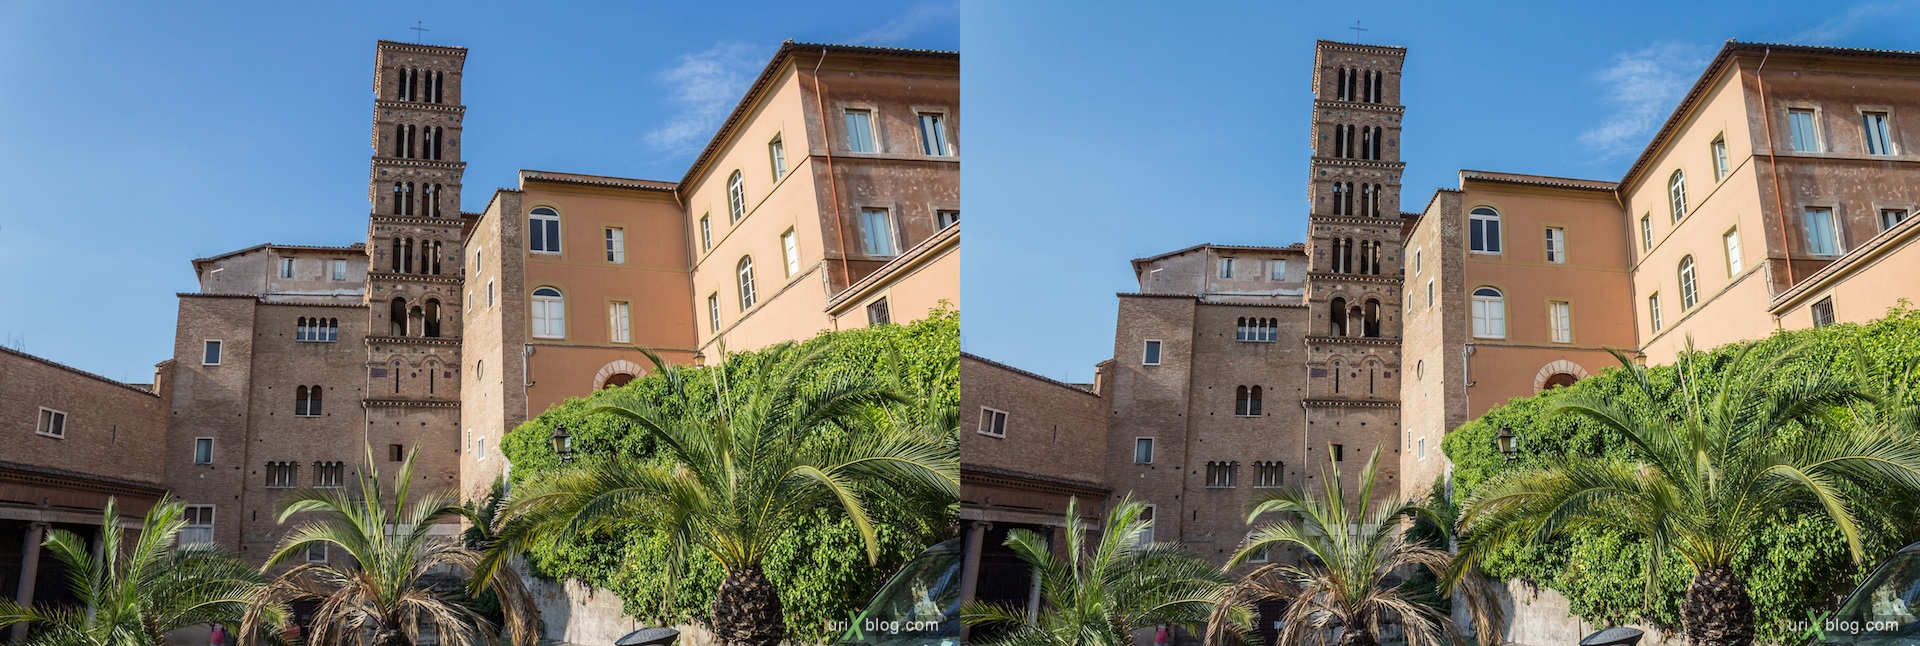 2012, church of Santi Giovanni e Paolo, Rome, Italy, cathedral, monastery, Christianity, Catholicism, 3D, stereo pair, cross-eyed, crossview, cross view stereo pair